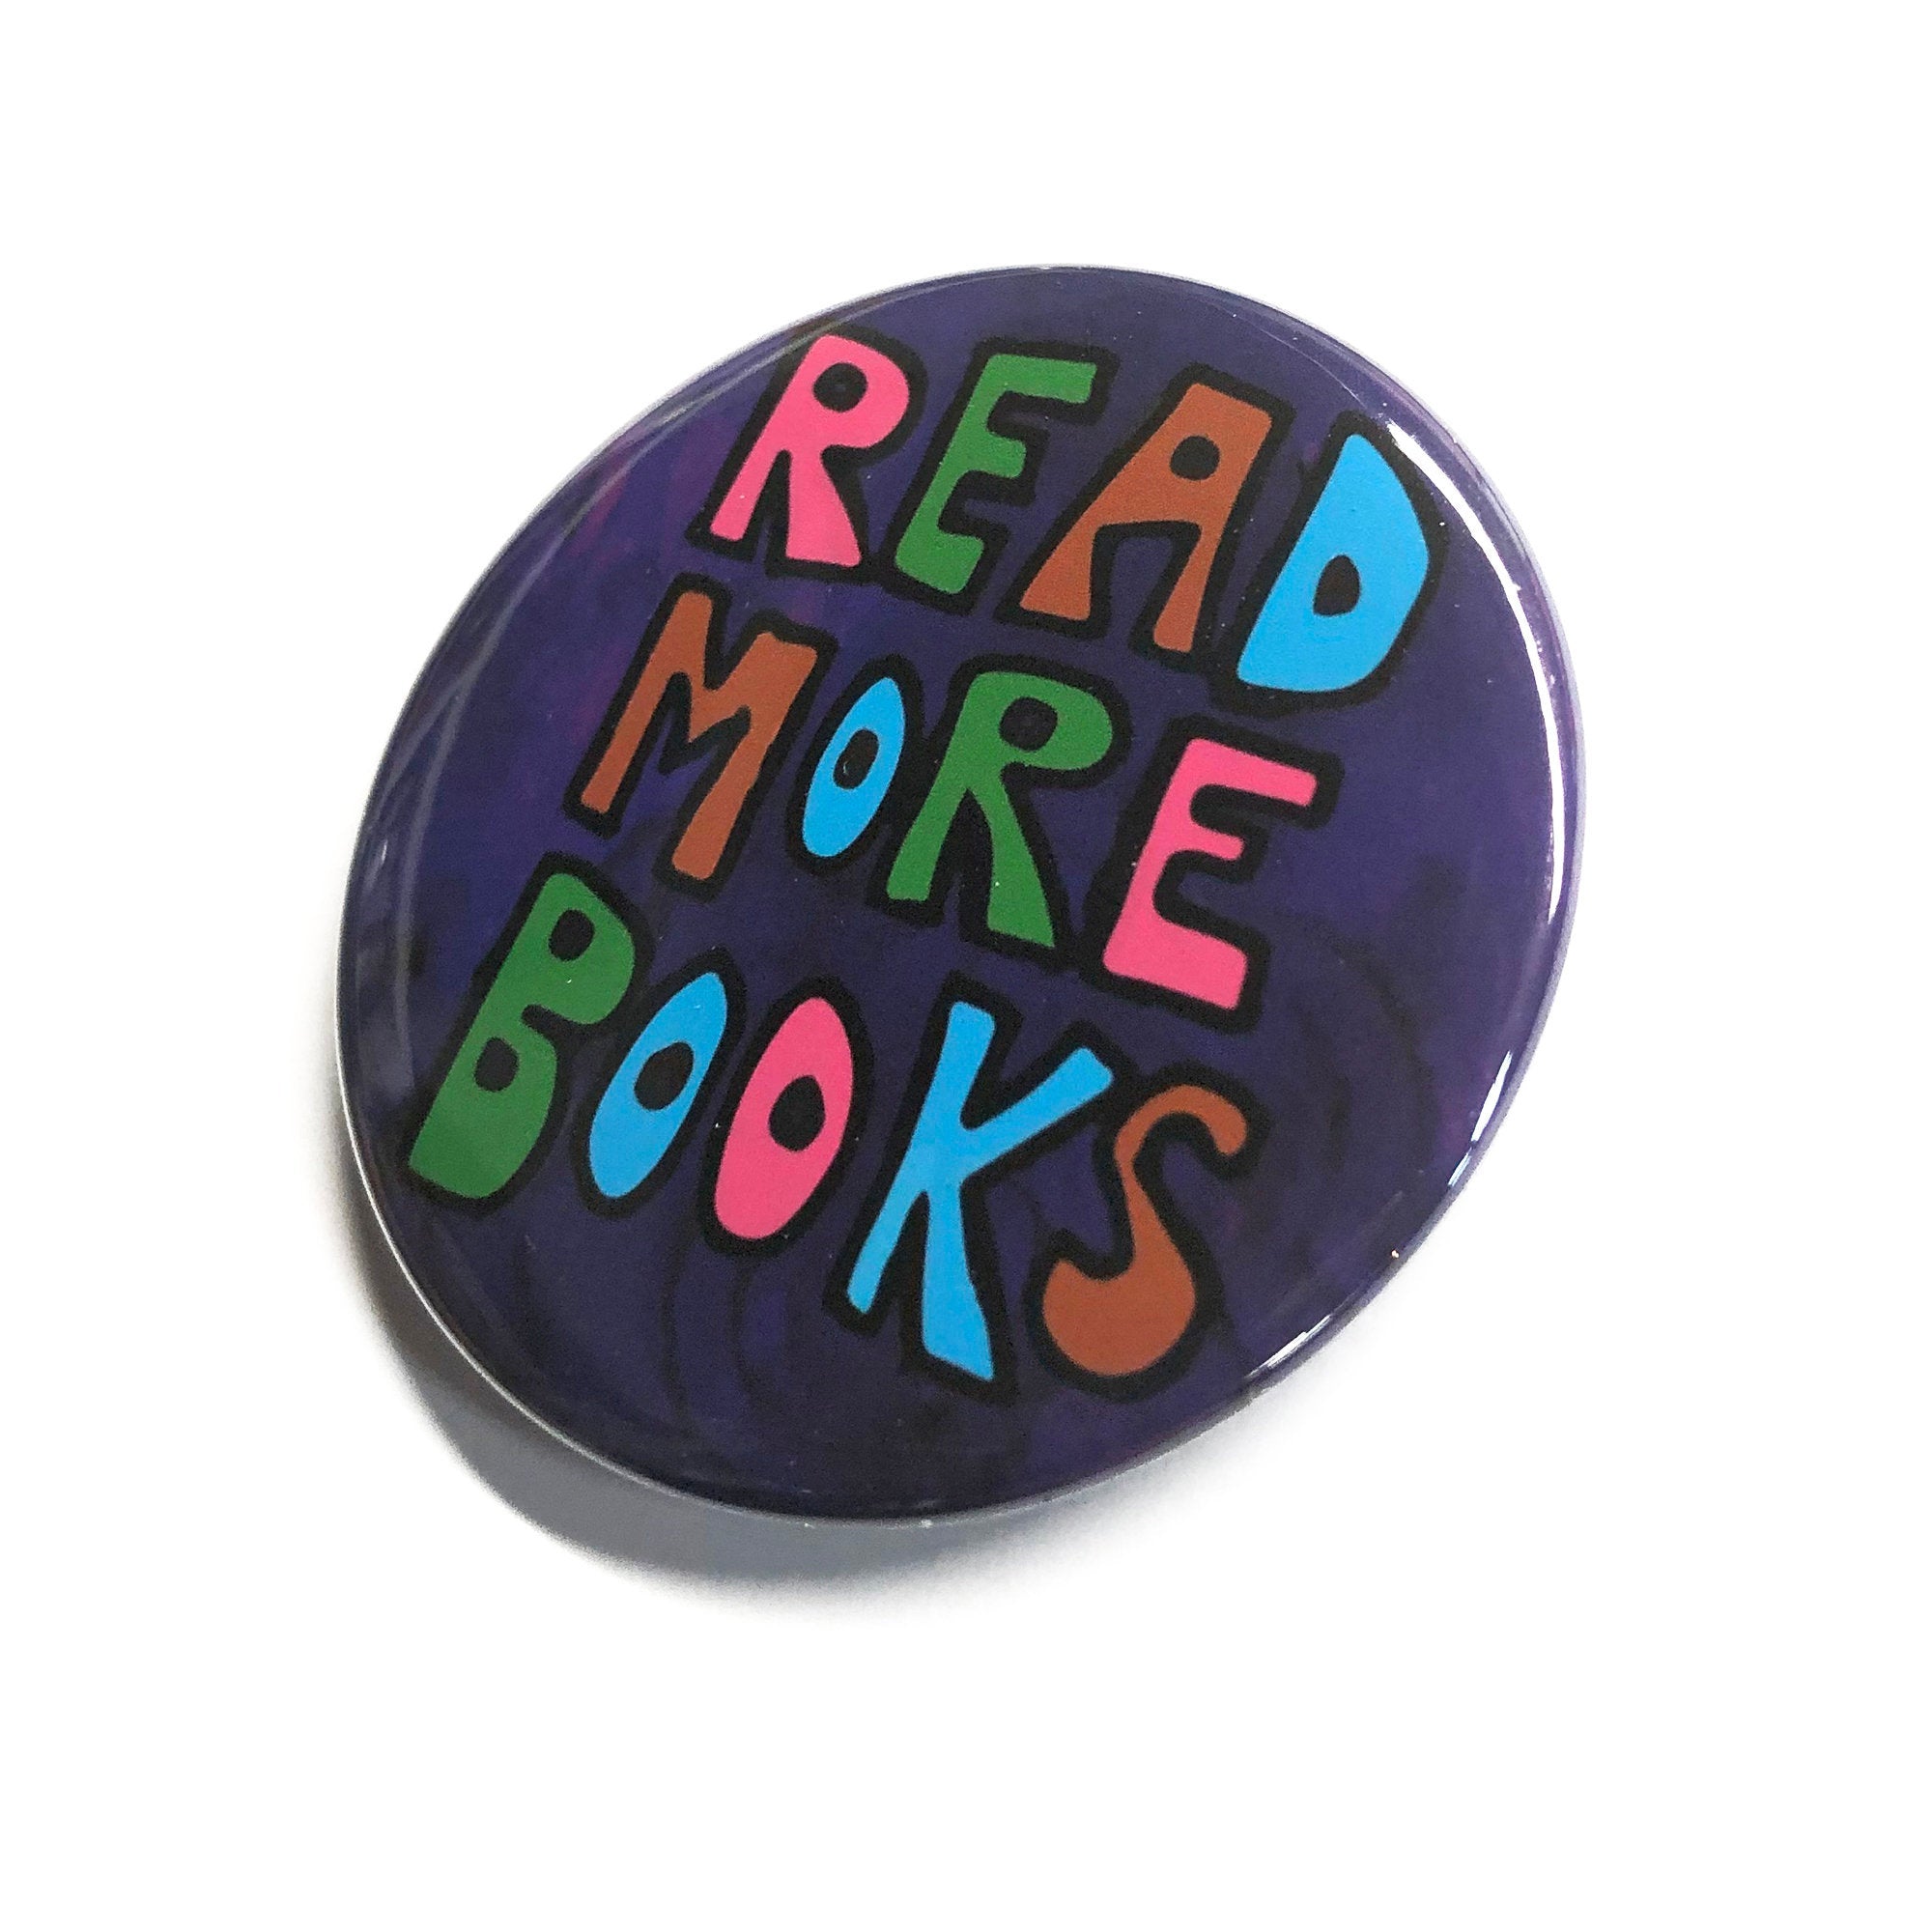 Read More Books Pin Back Button, Fridge Magnet, or Pocket Mirror